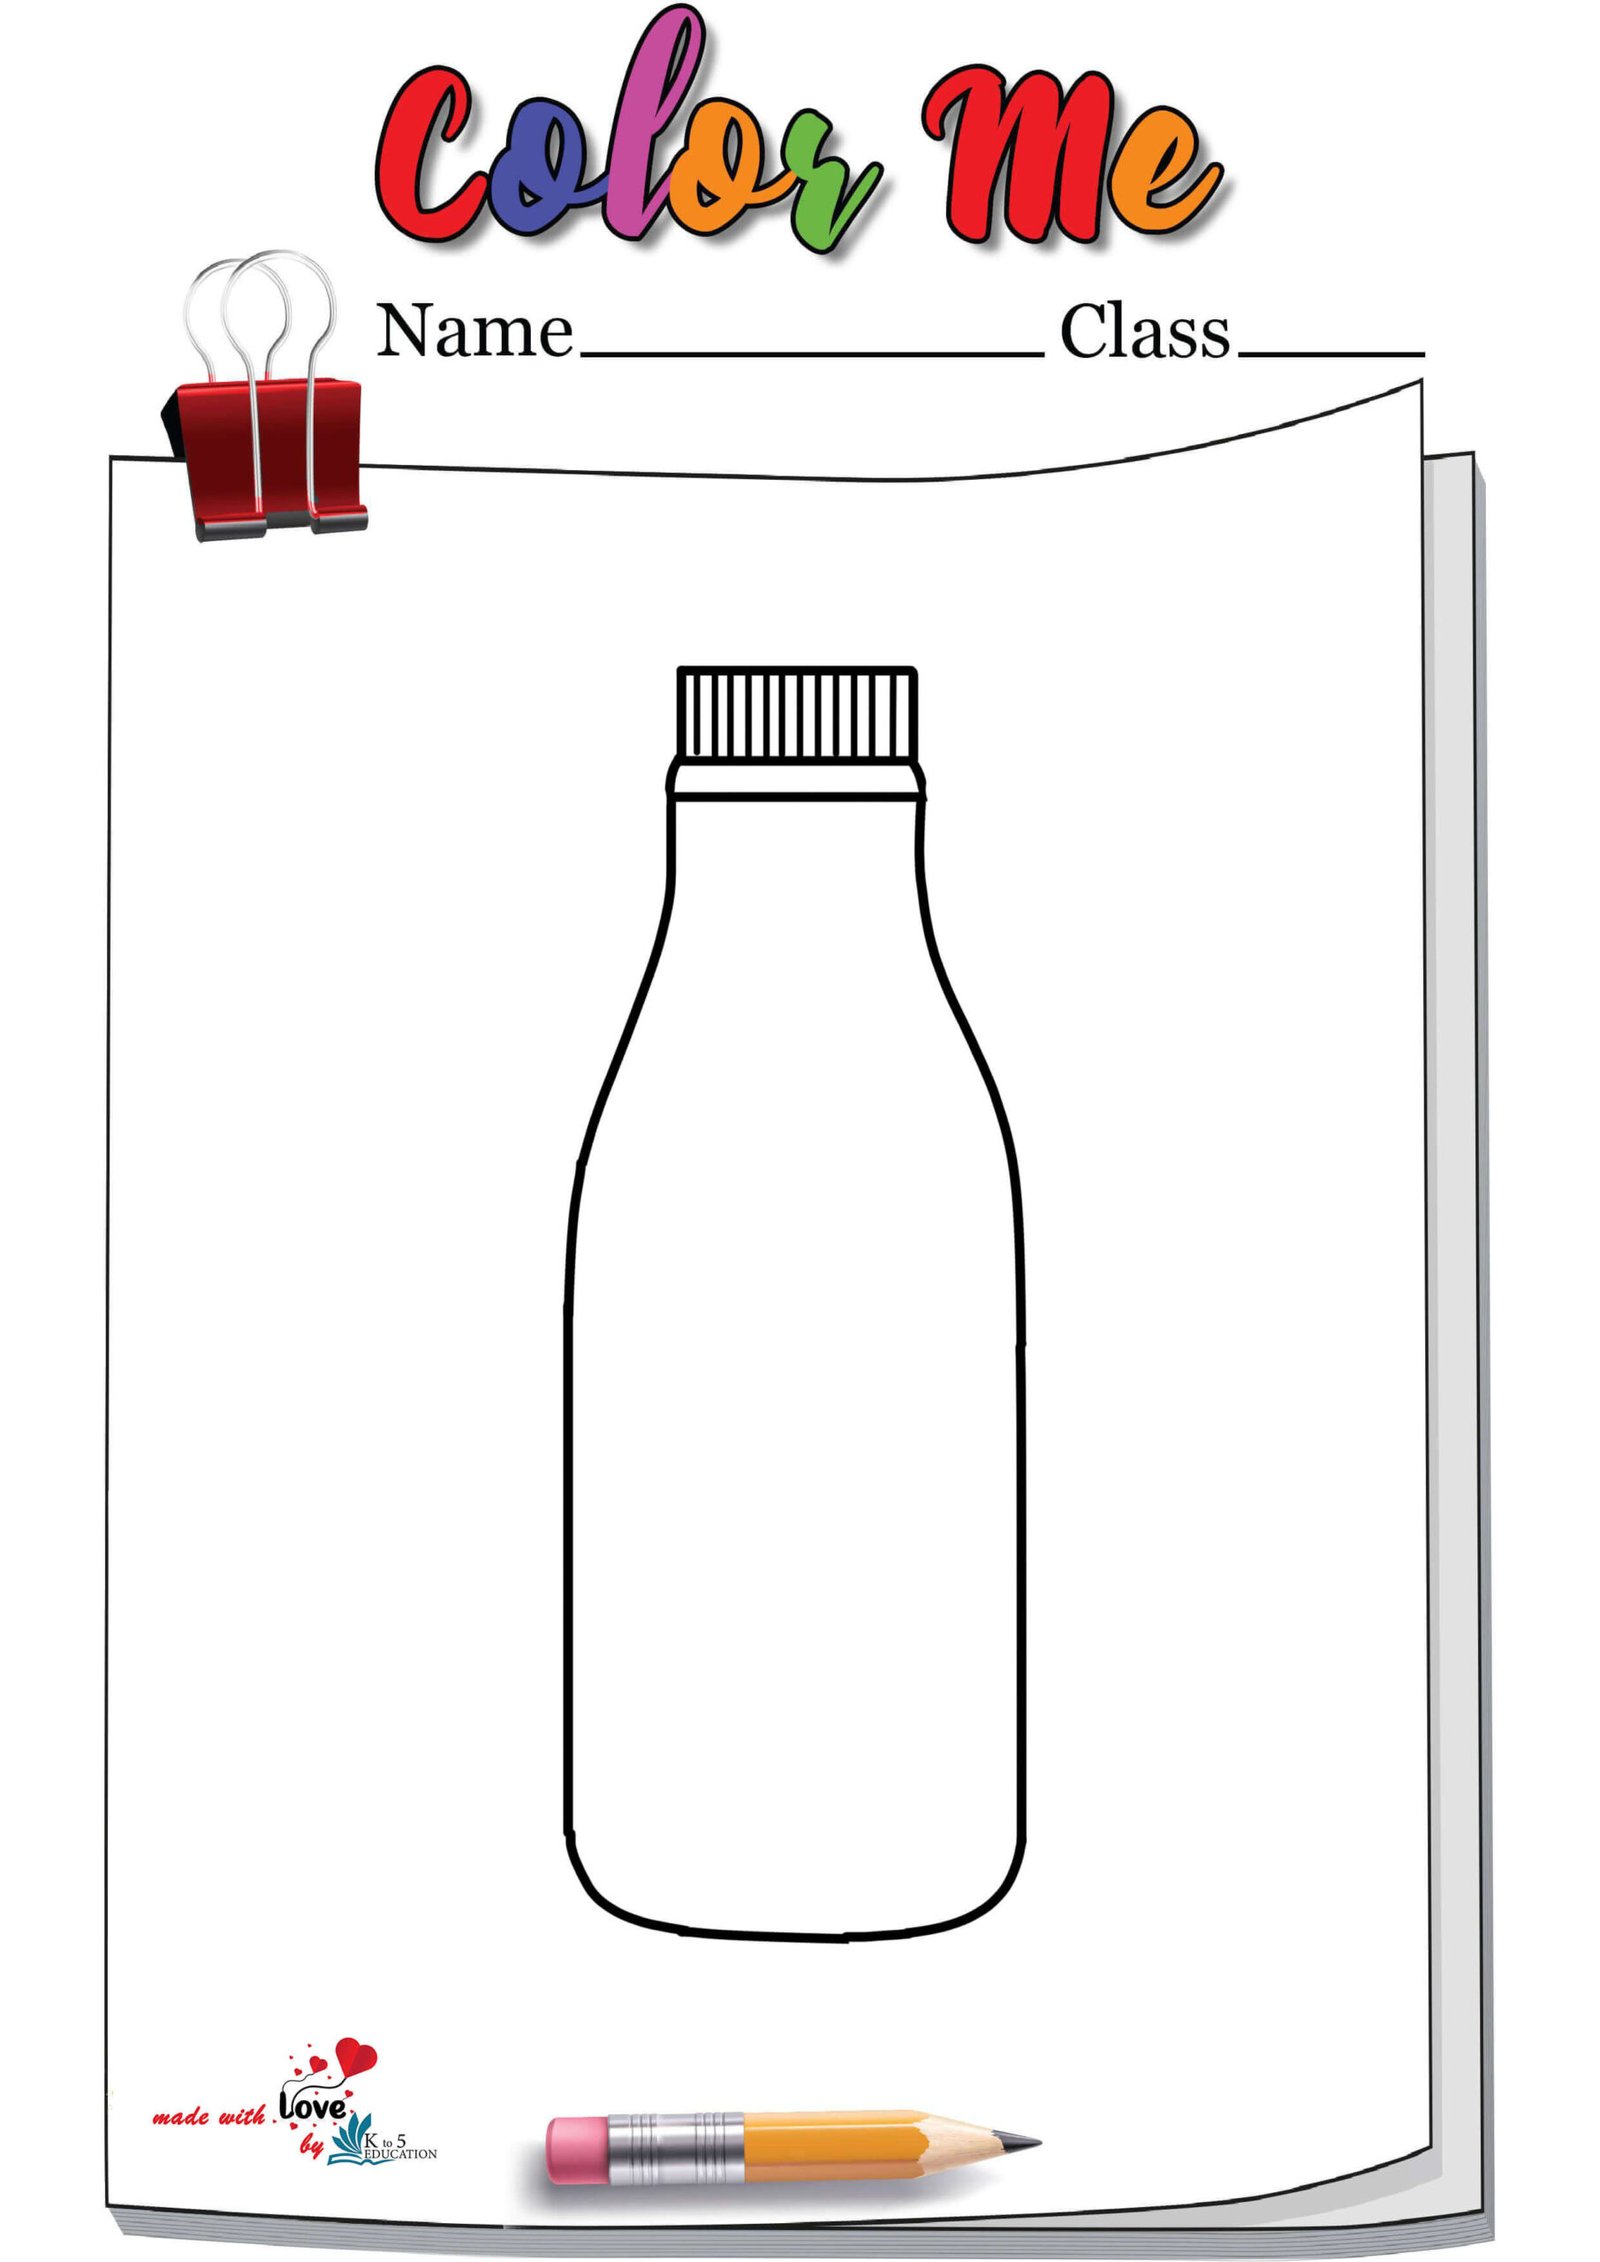 Free Milk Bottle Coloring Page